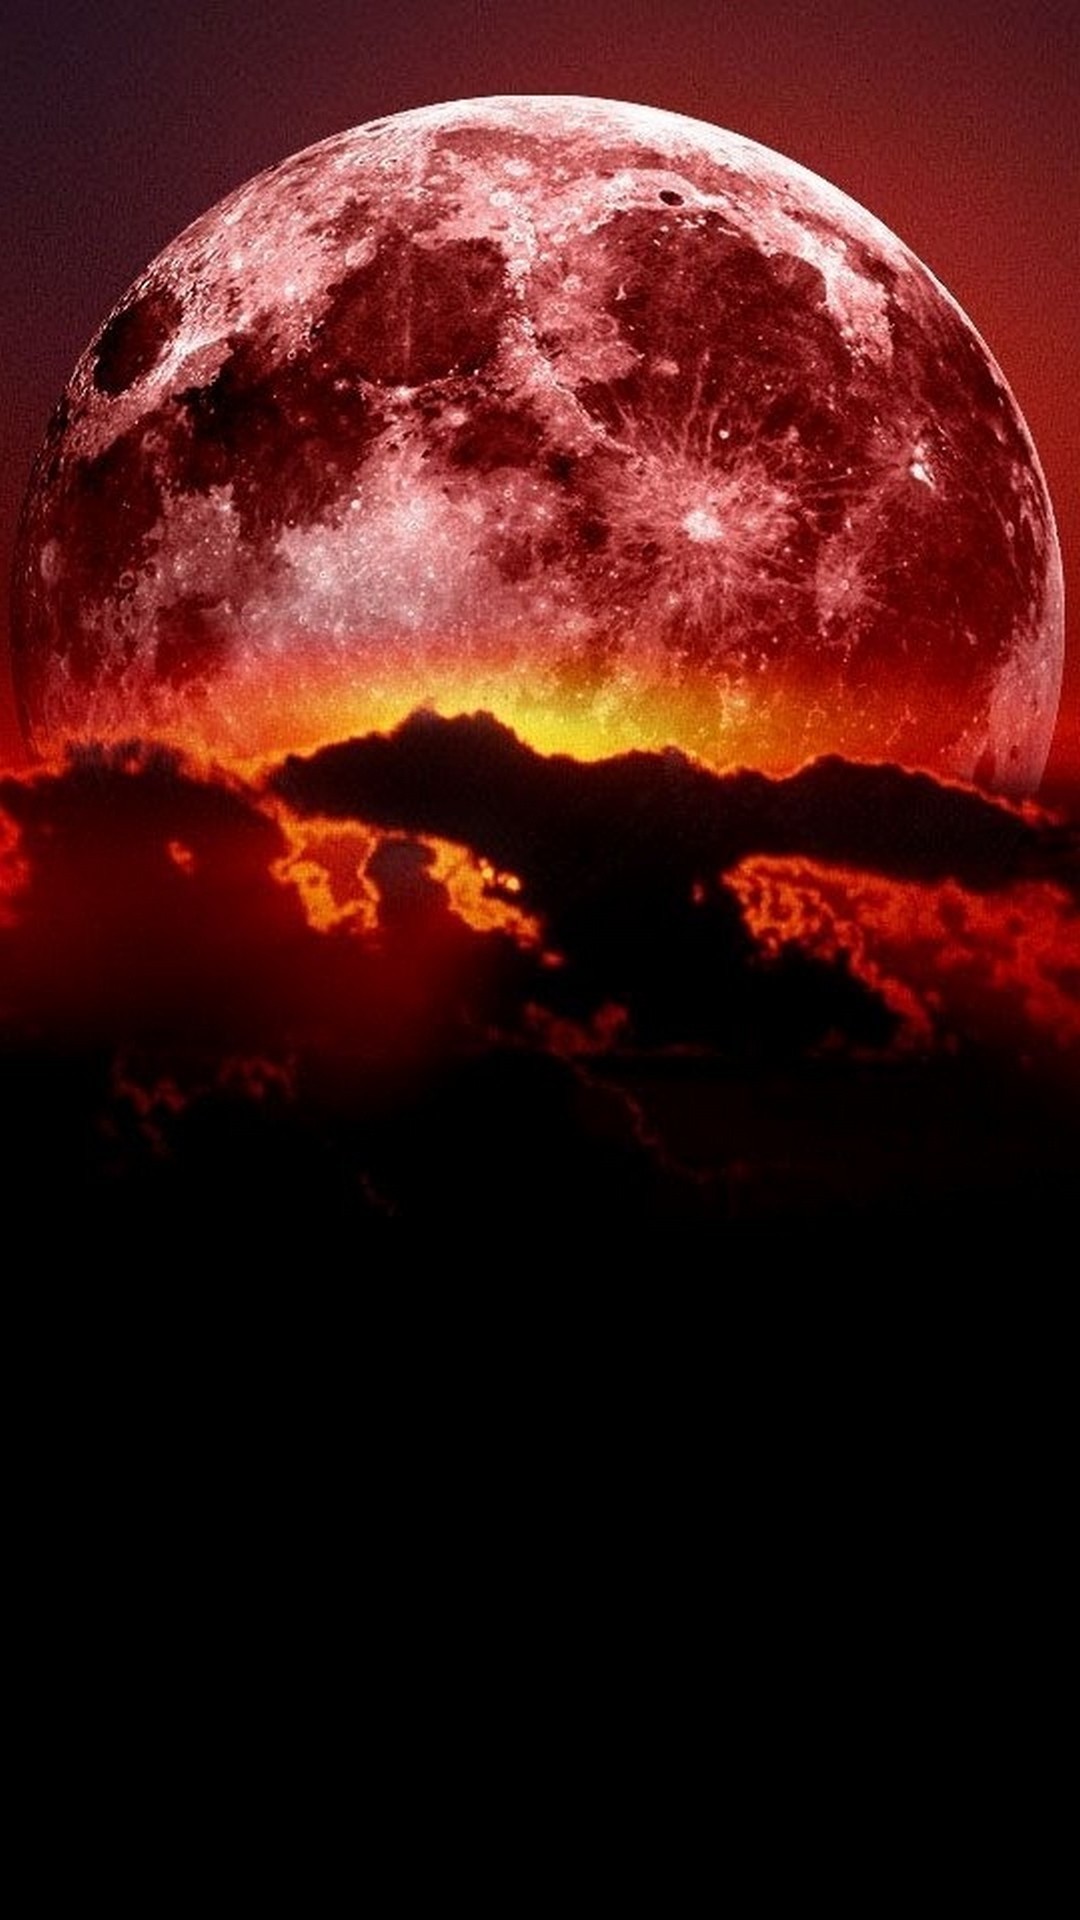 1080x1920 Super Blood Moon Wallpaper Android with HD resolution 